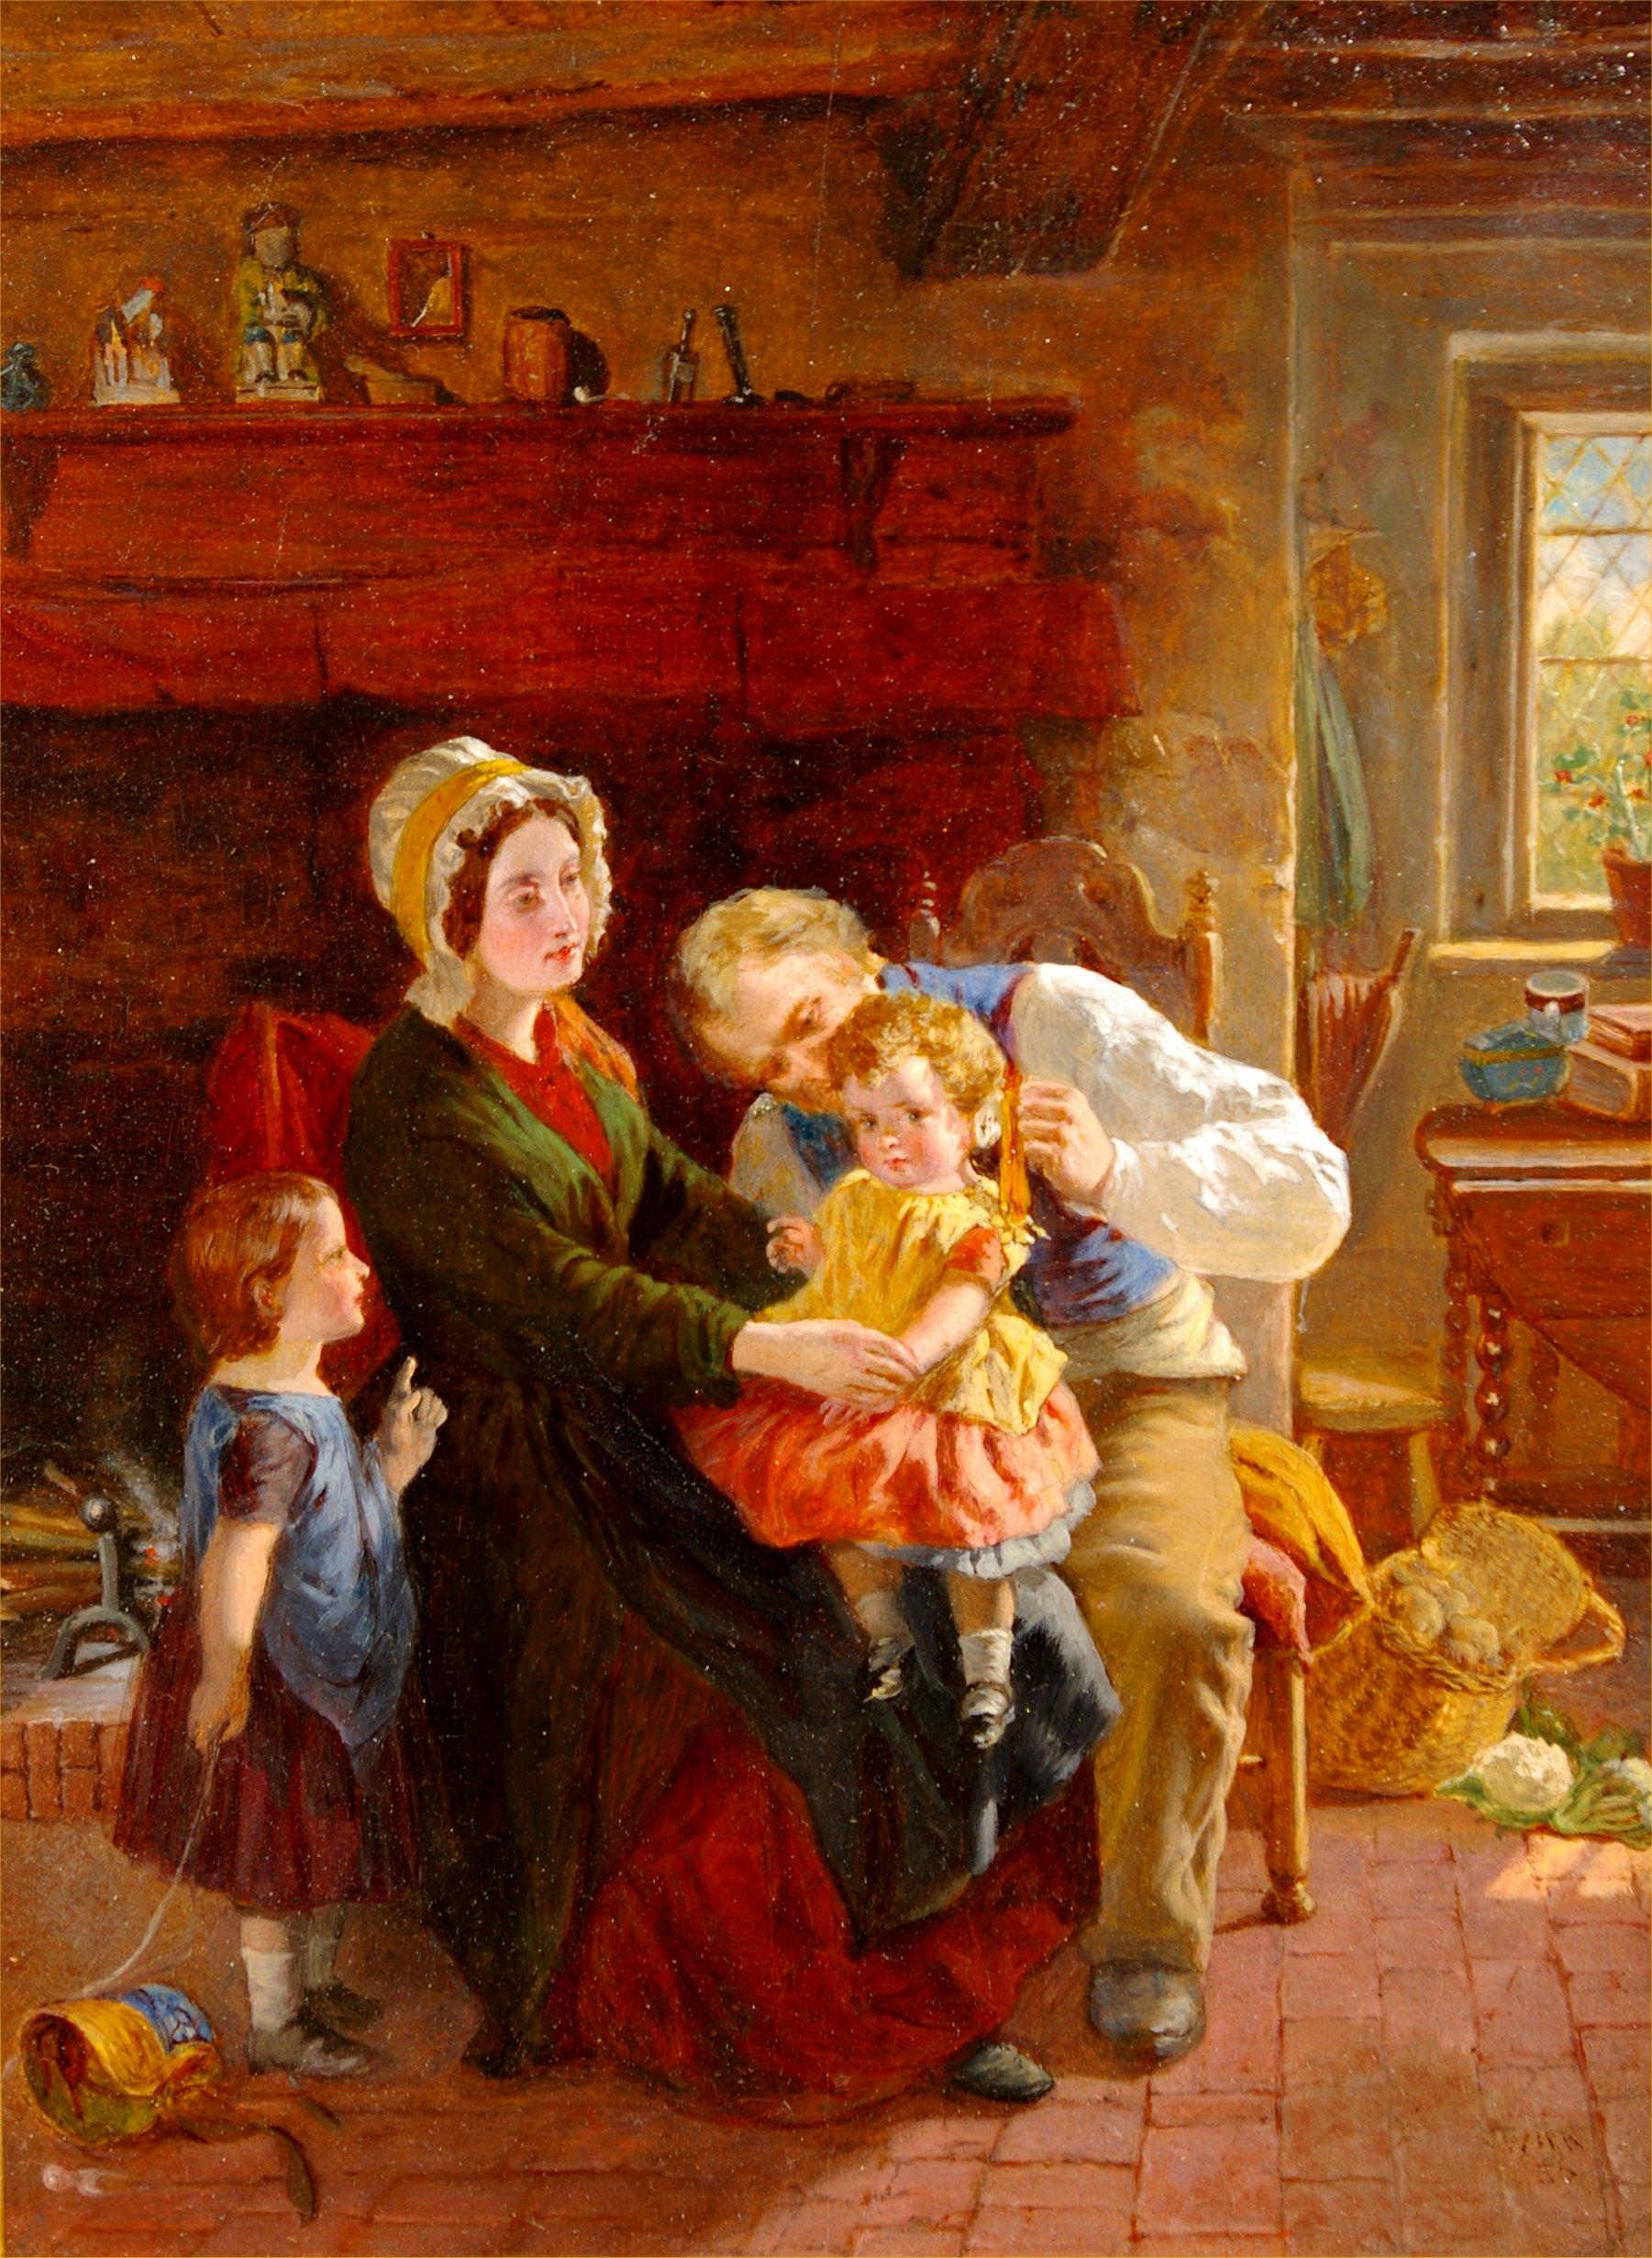 The Finishing Touches - Painting by William Henry Knight